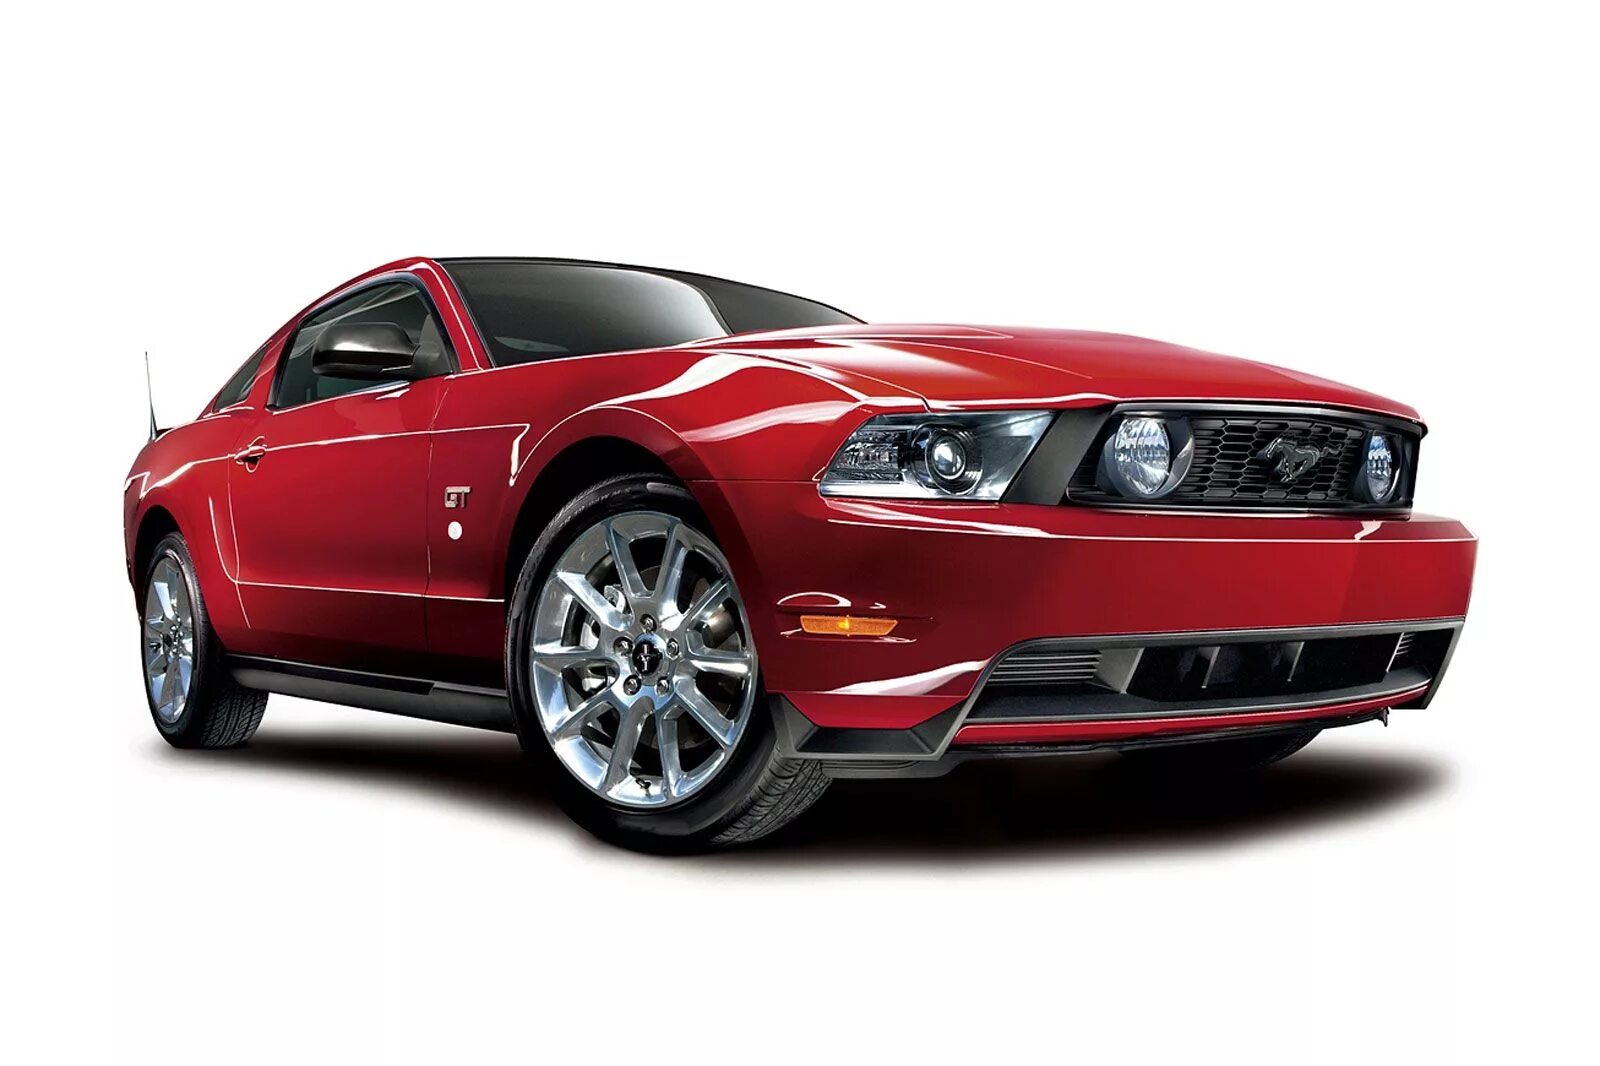 Форд мустанг 5.0. Ford Mustang 5.0. Ford Mustang gt 2011. 2010 Ford Mustang 5.0 gt. Форд Мустанг gt 2010.